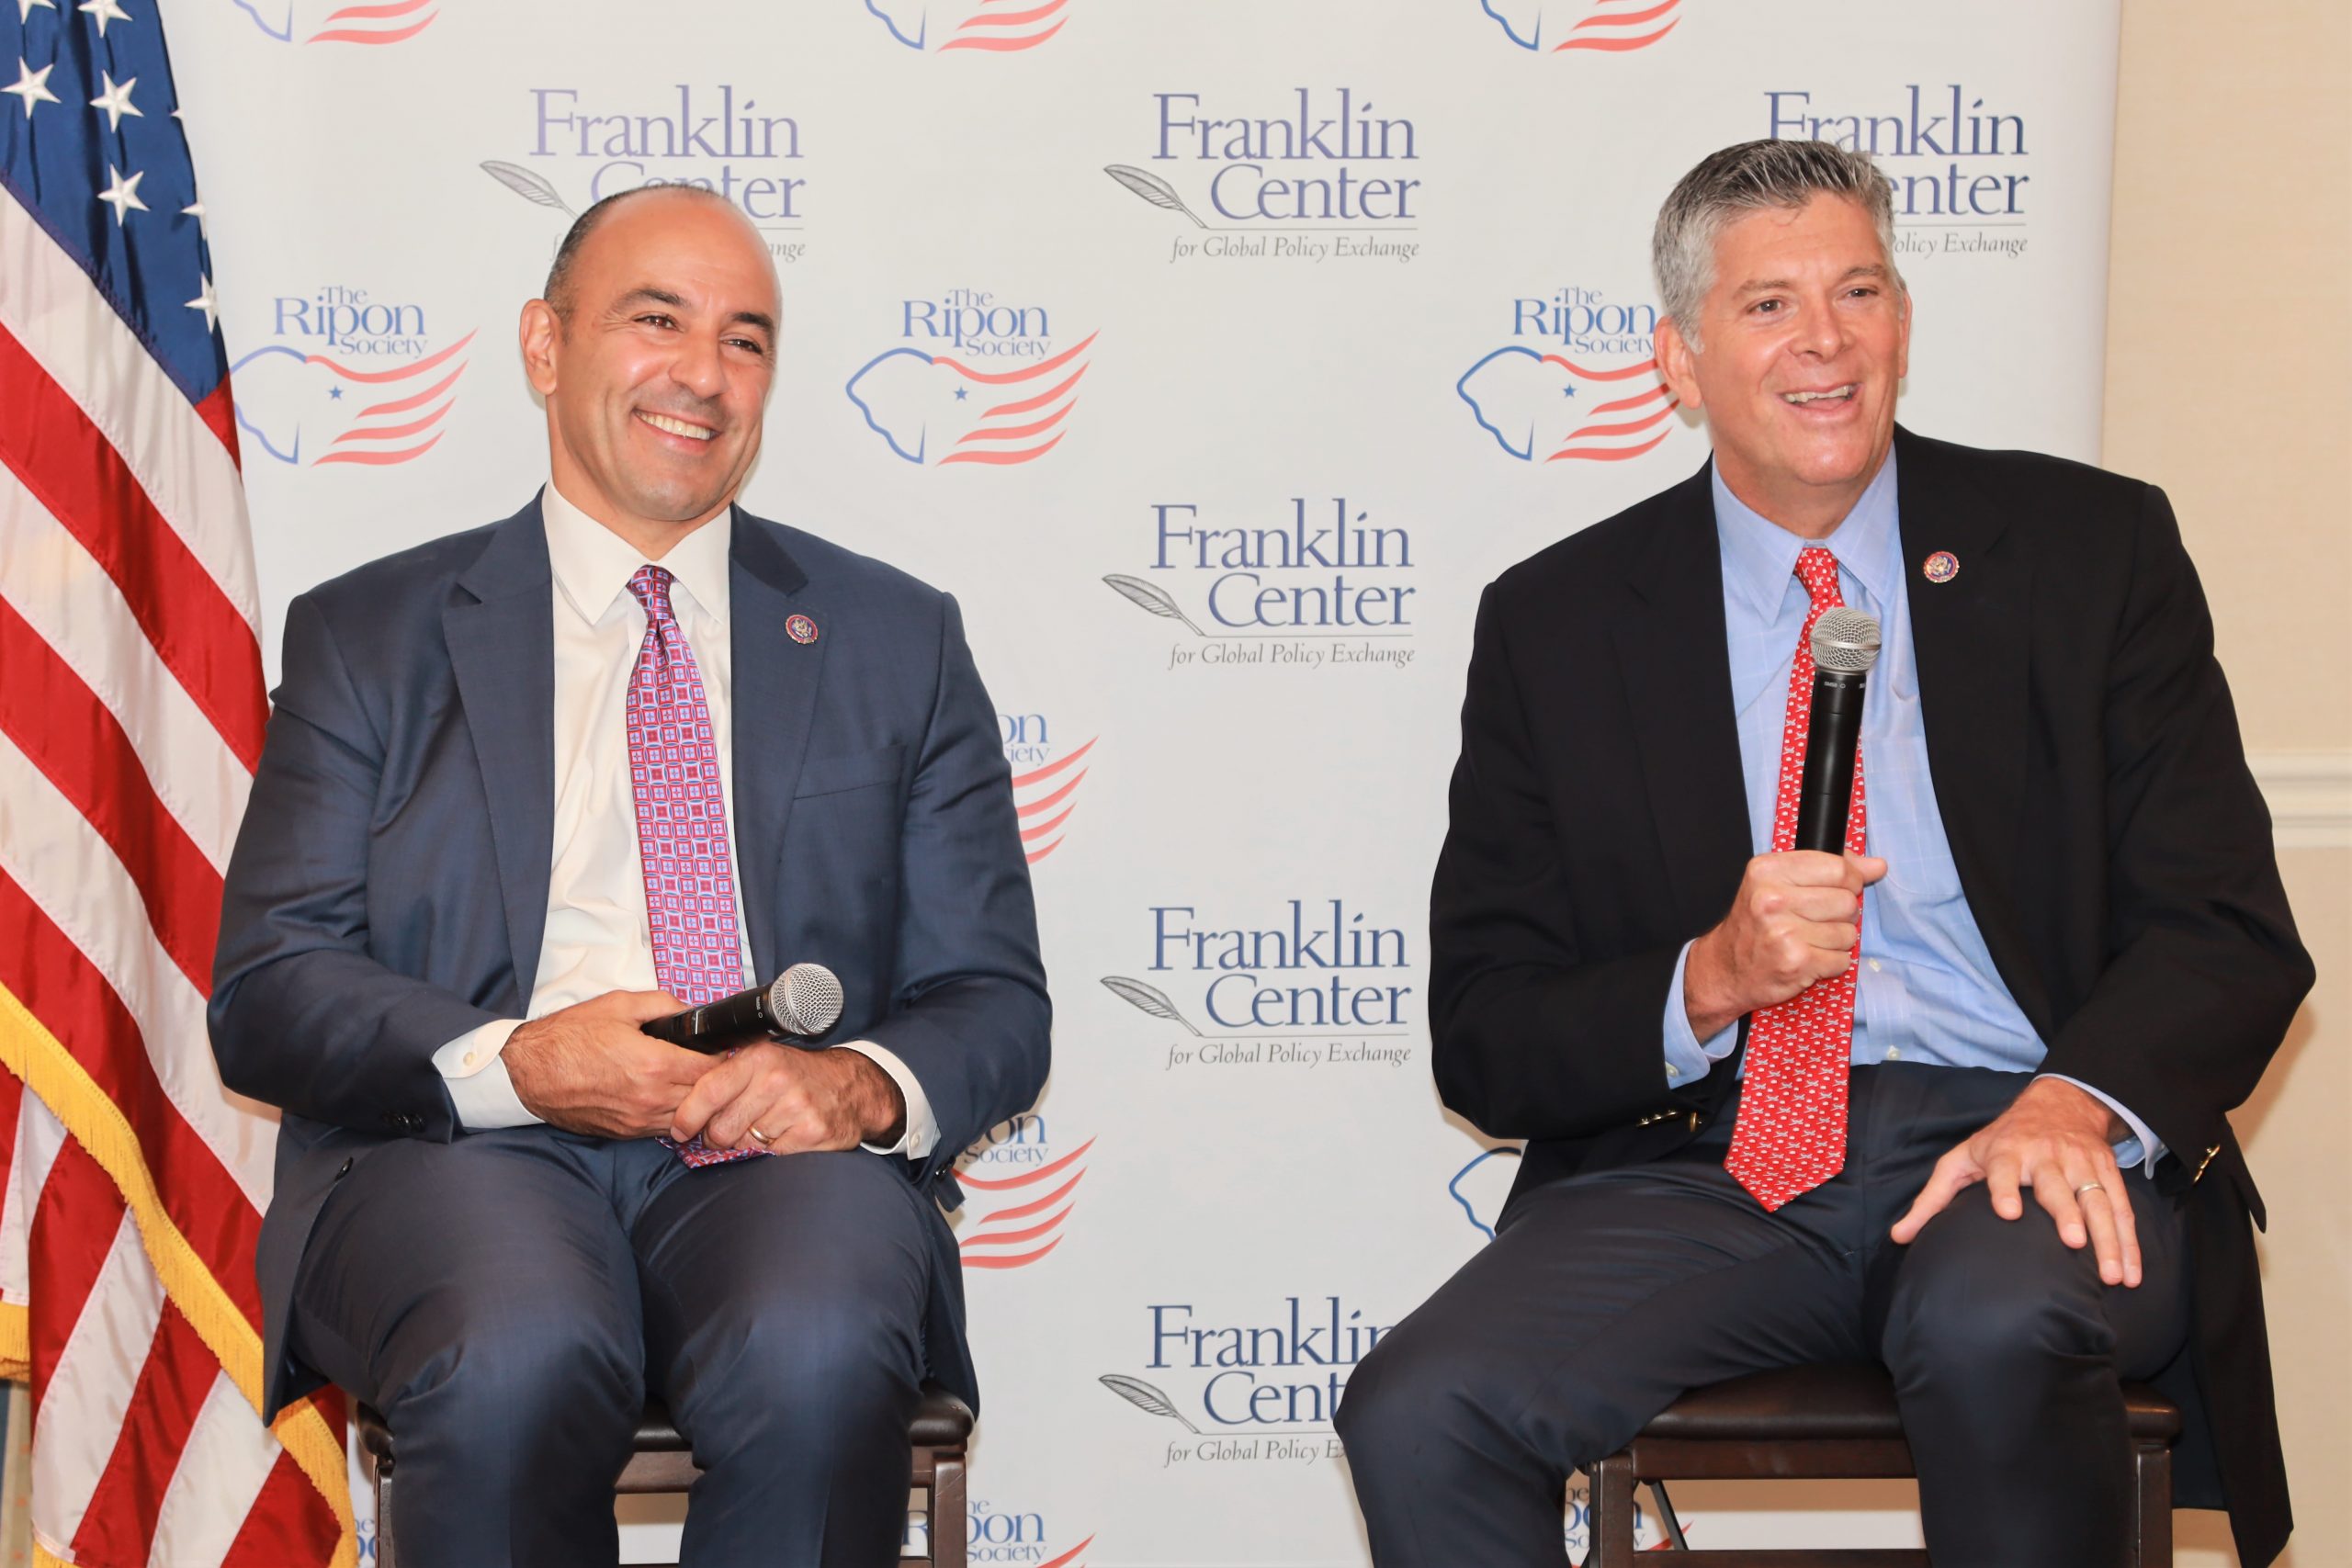 LaHood & Panetta Forge Bipartisan Alliance to Help America’s Hotel & Restaurant Workers